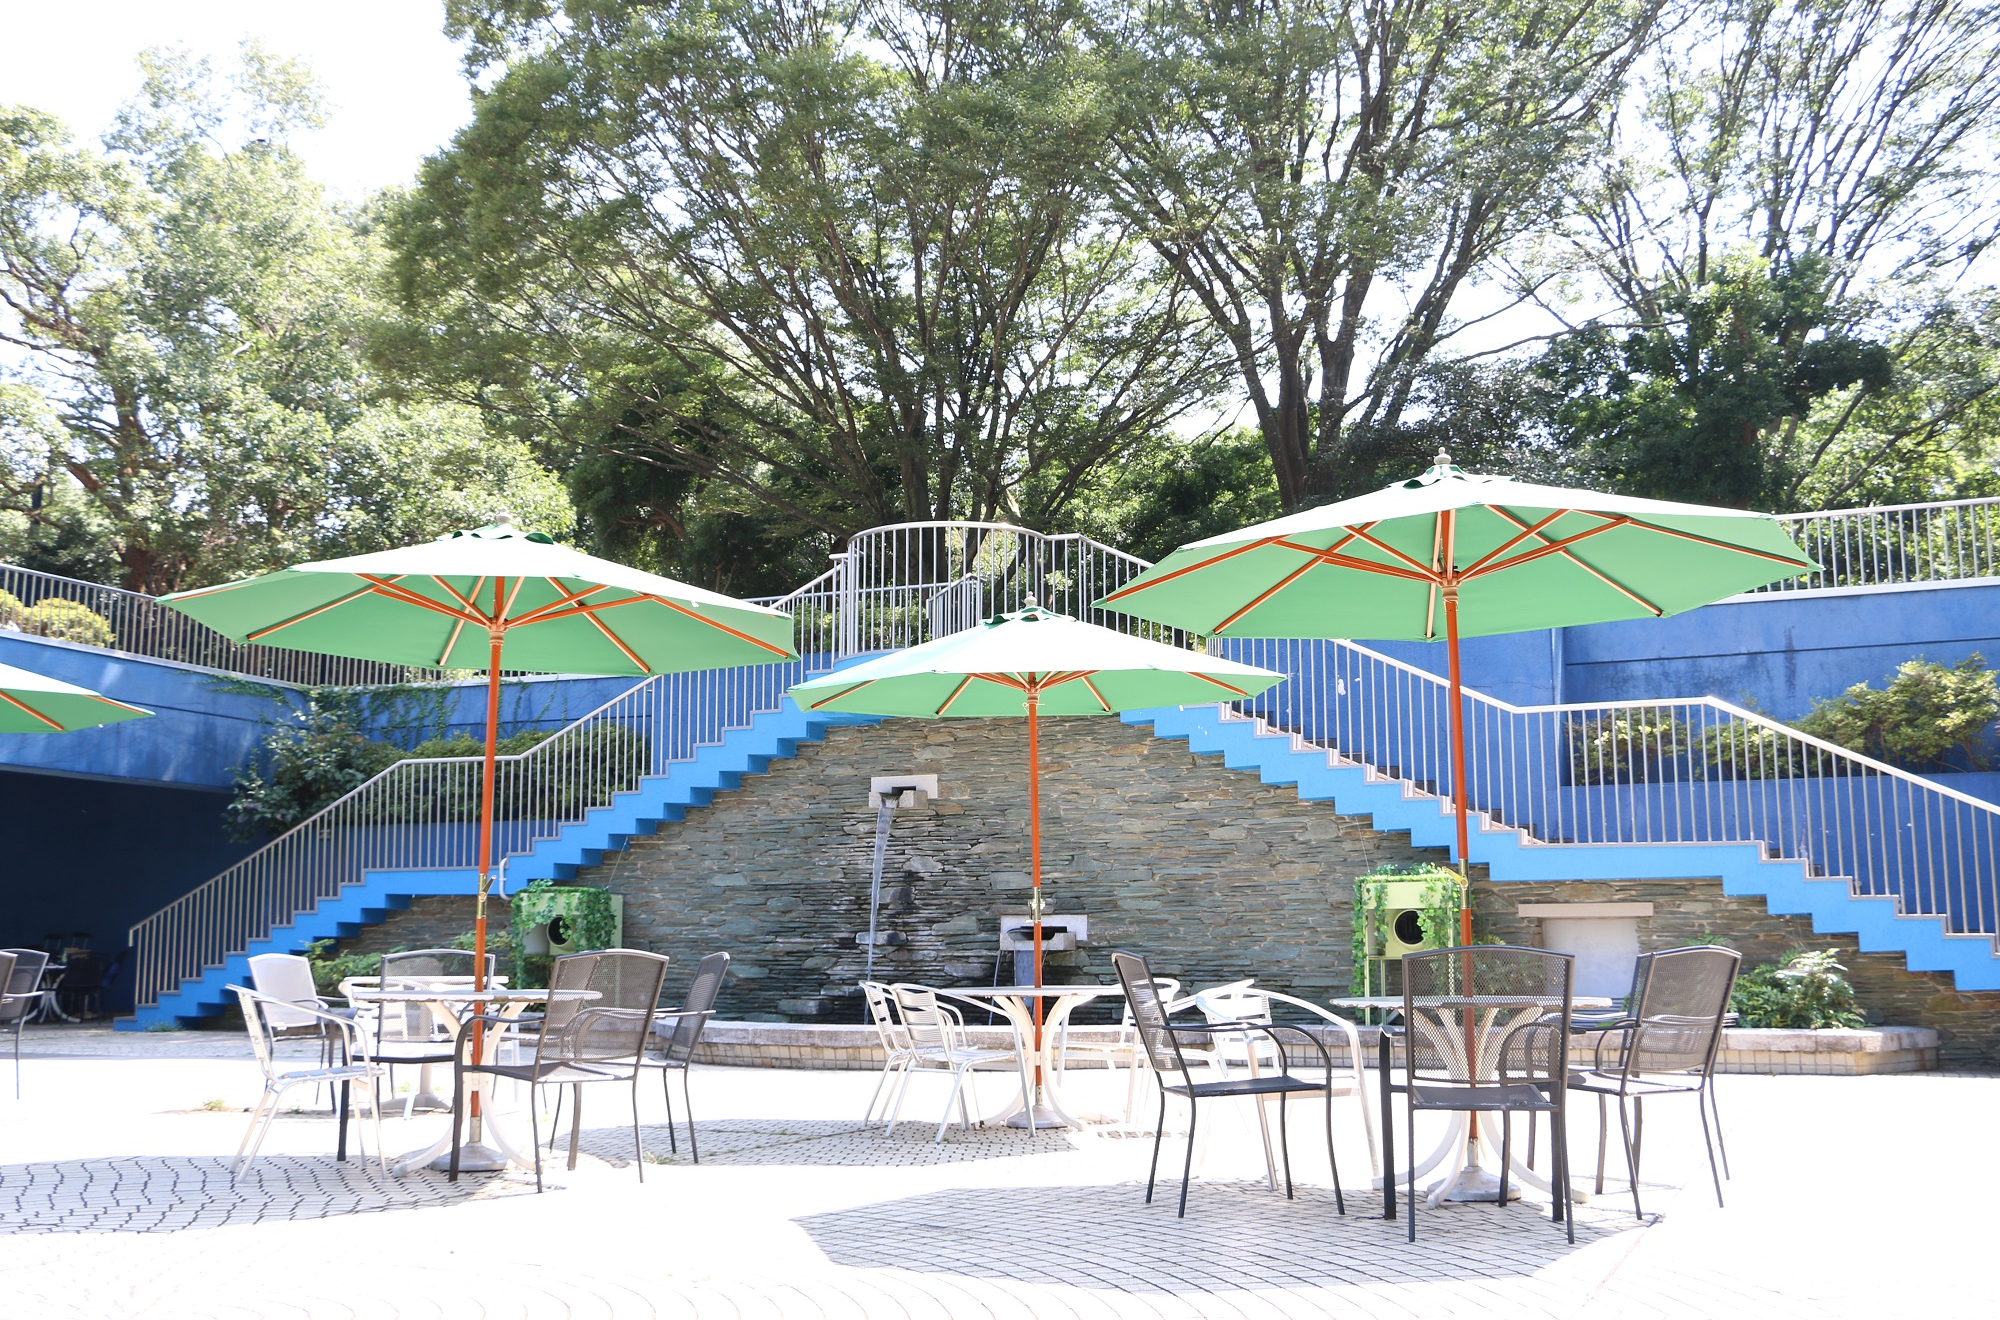 Creating a green, clean and comfortable Oasis in a Zoo with outdoor Air-Conditioning solutions